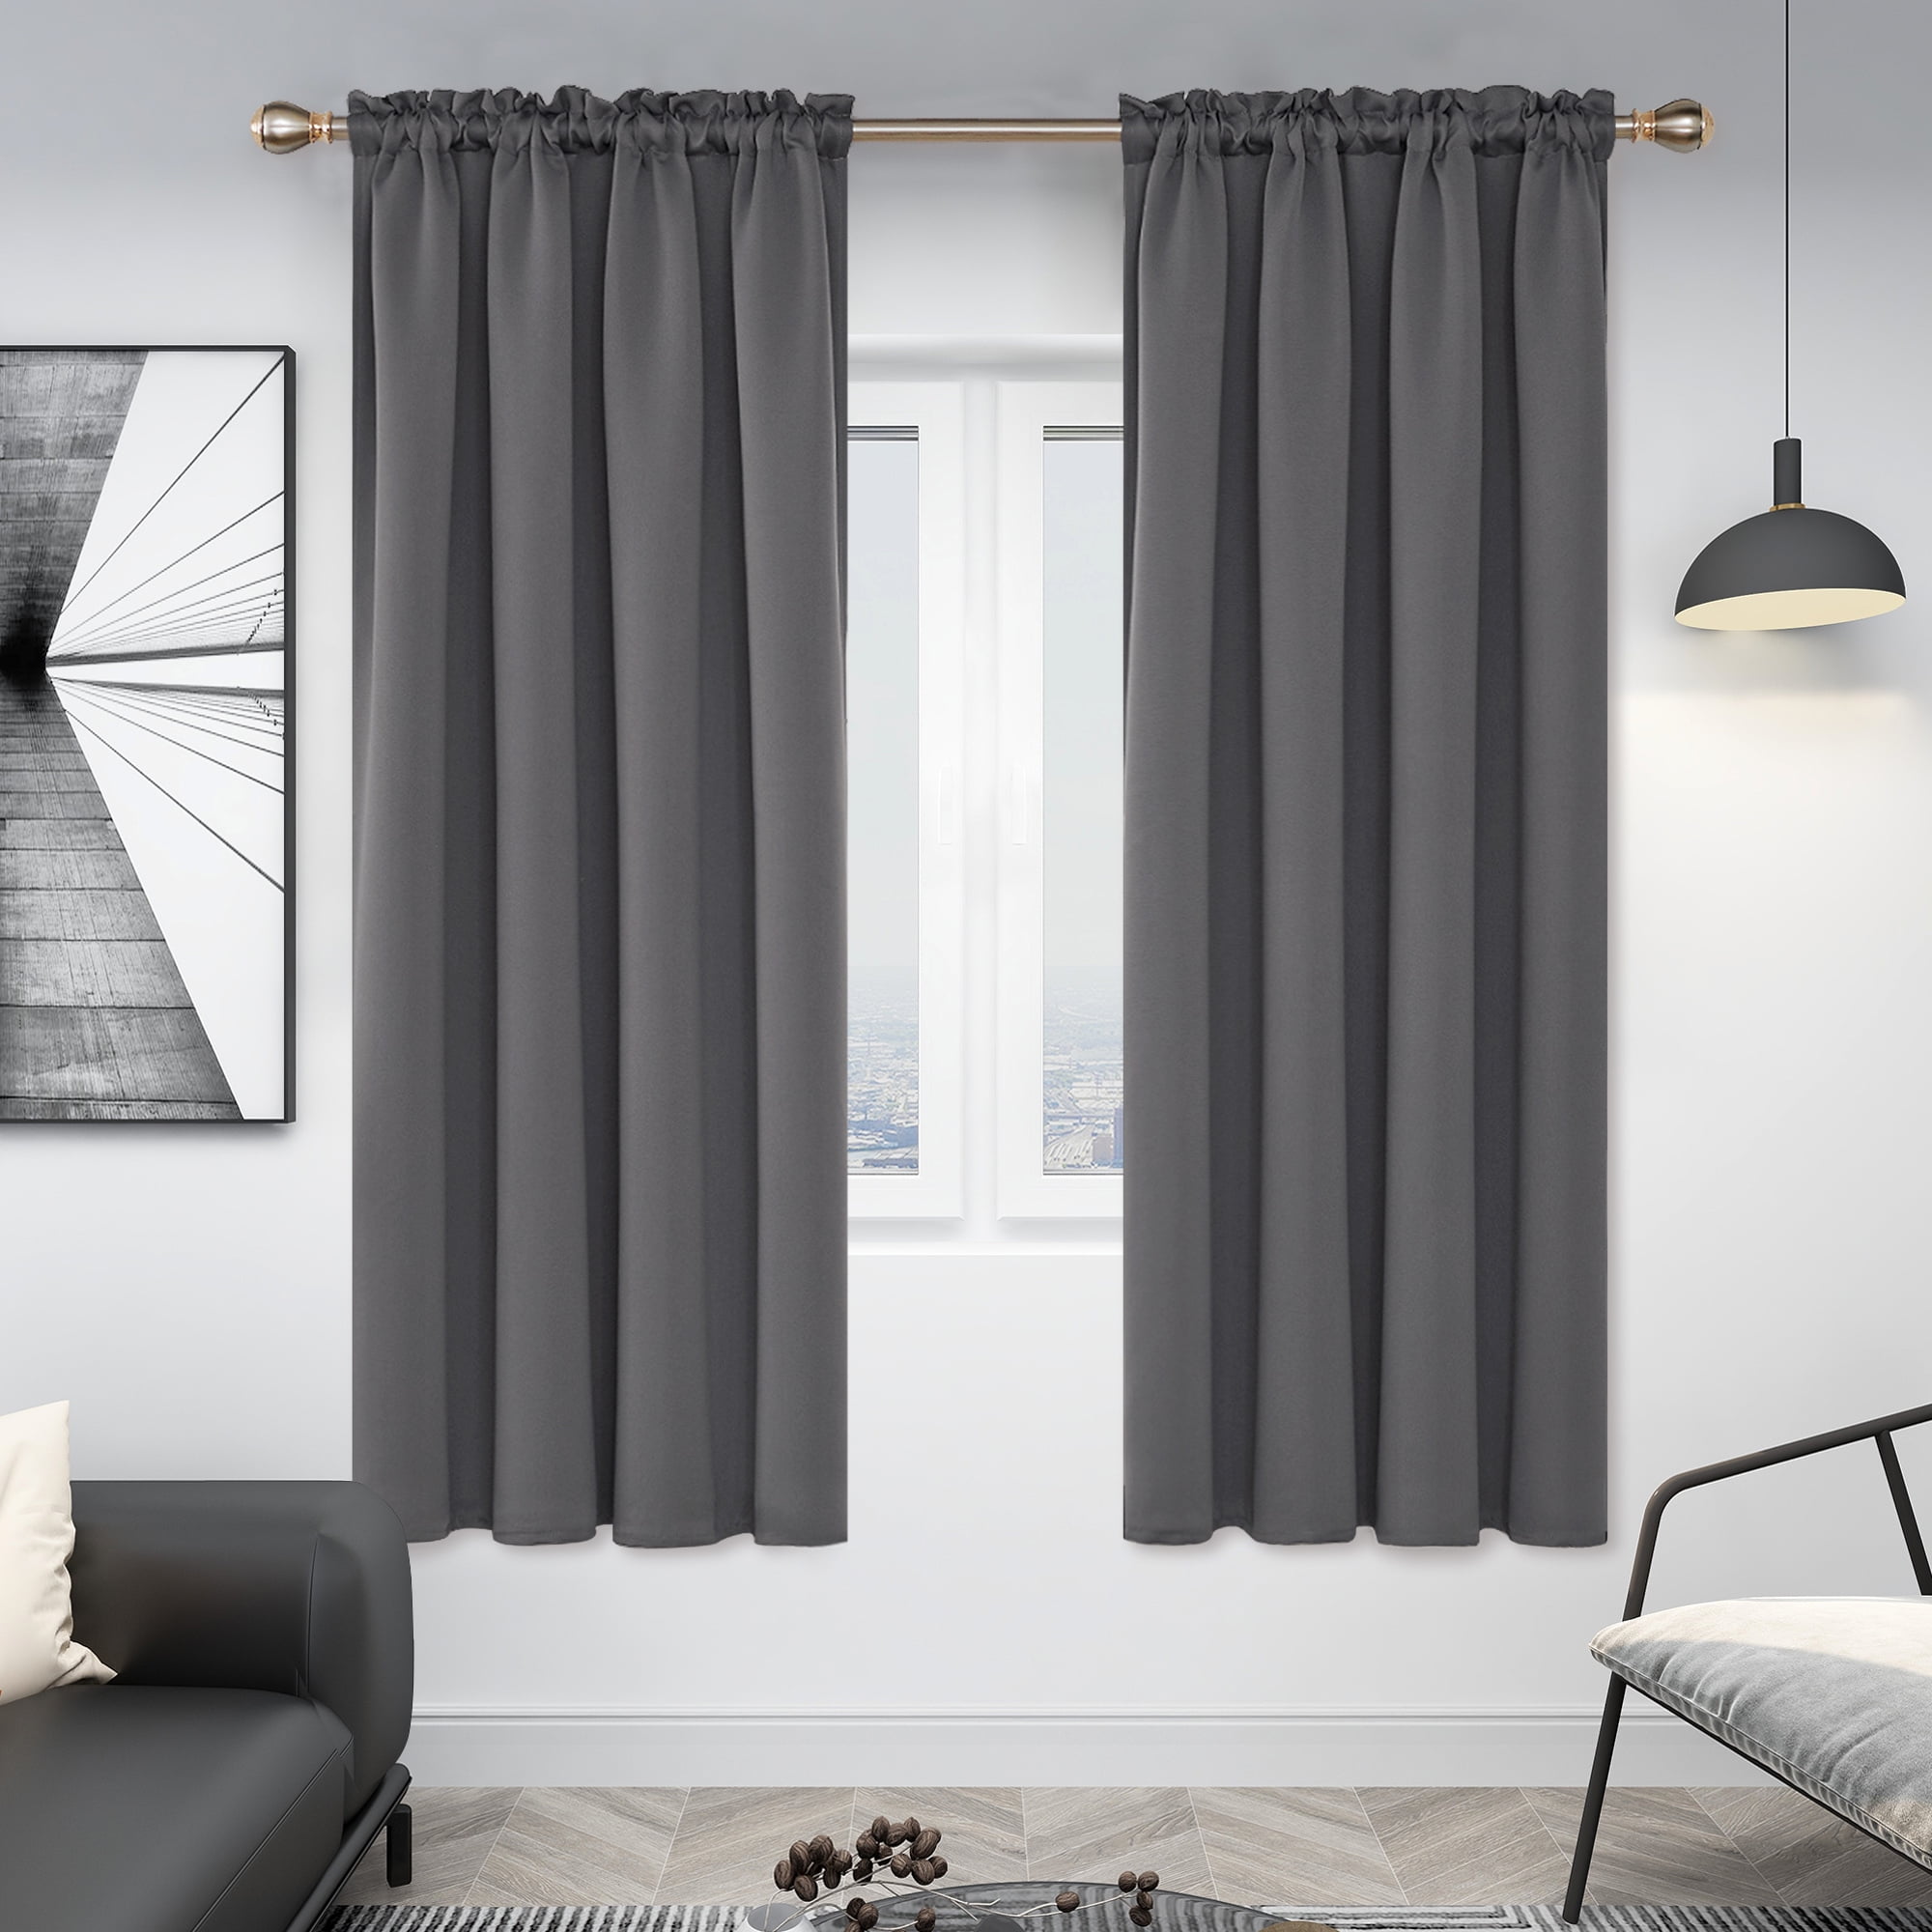 Deconovo Blackout Curtains Rod Pocket Curtain Panels Thermal Insulated  Curtains for Dining Room 52 W x 54 L inch 2 Panels 